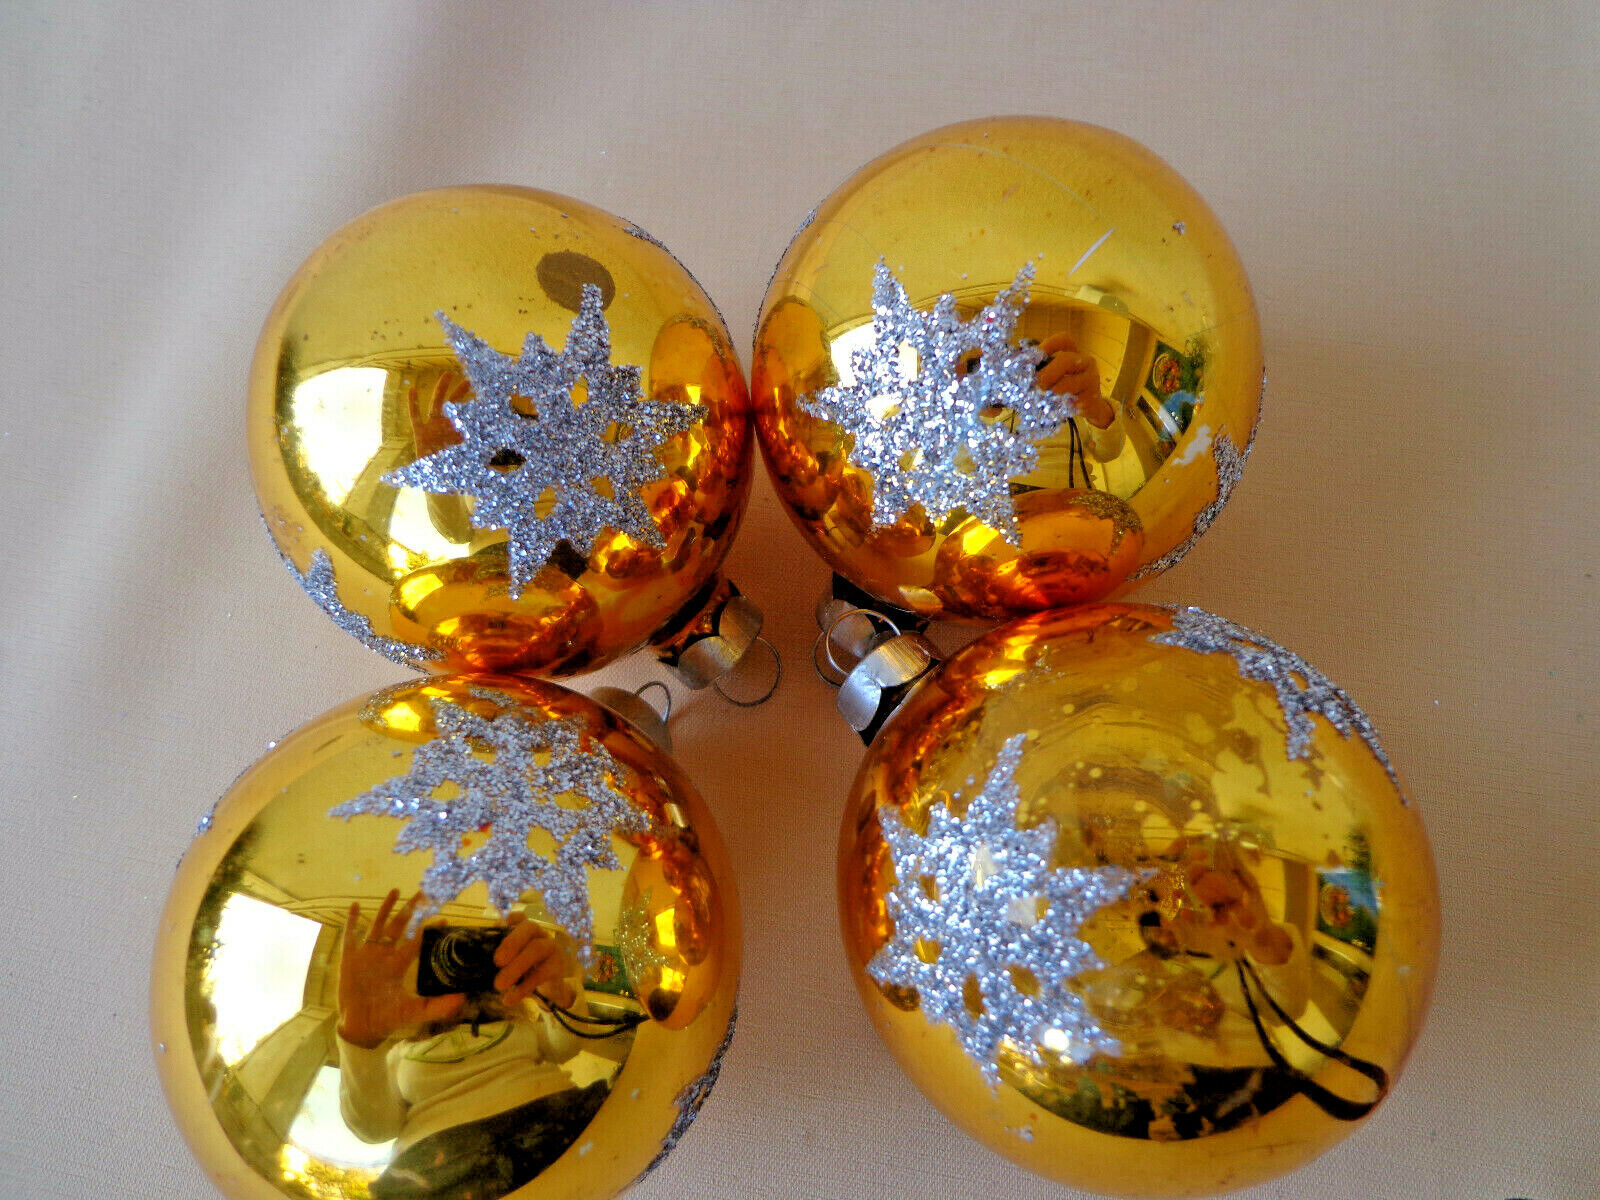 4 Vintage Christmas Ornaments Mercury Glass GOLD Silver Mica Glitter Snowflakes Baugh